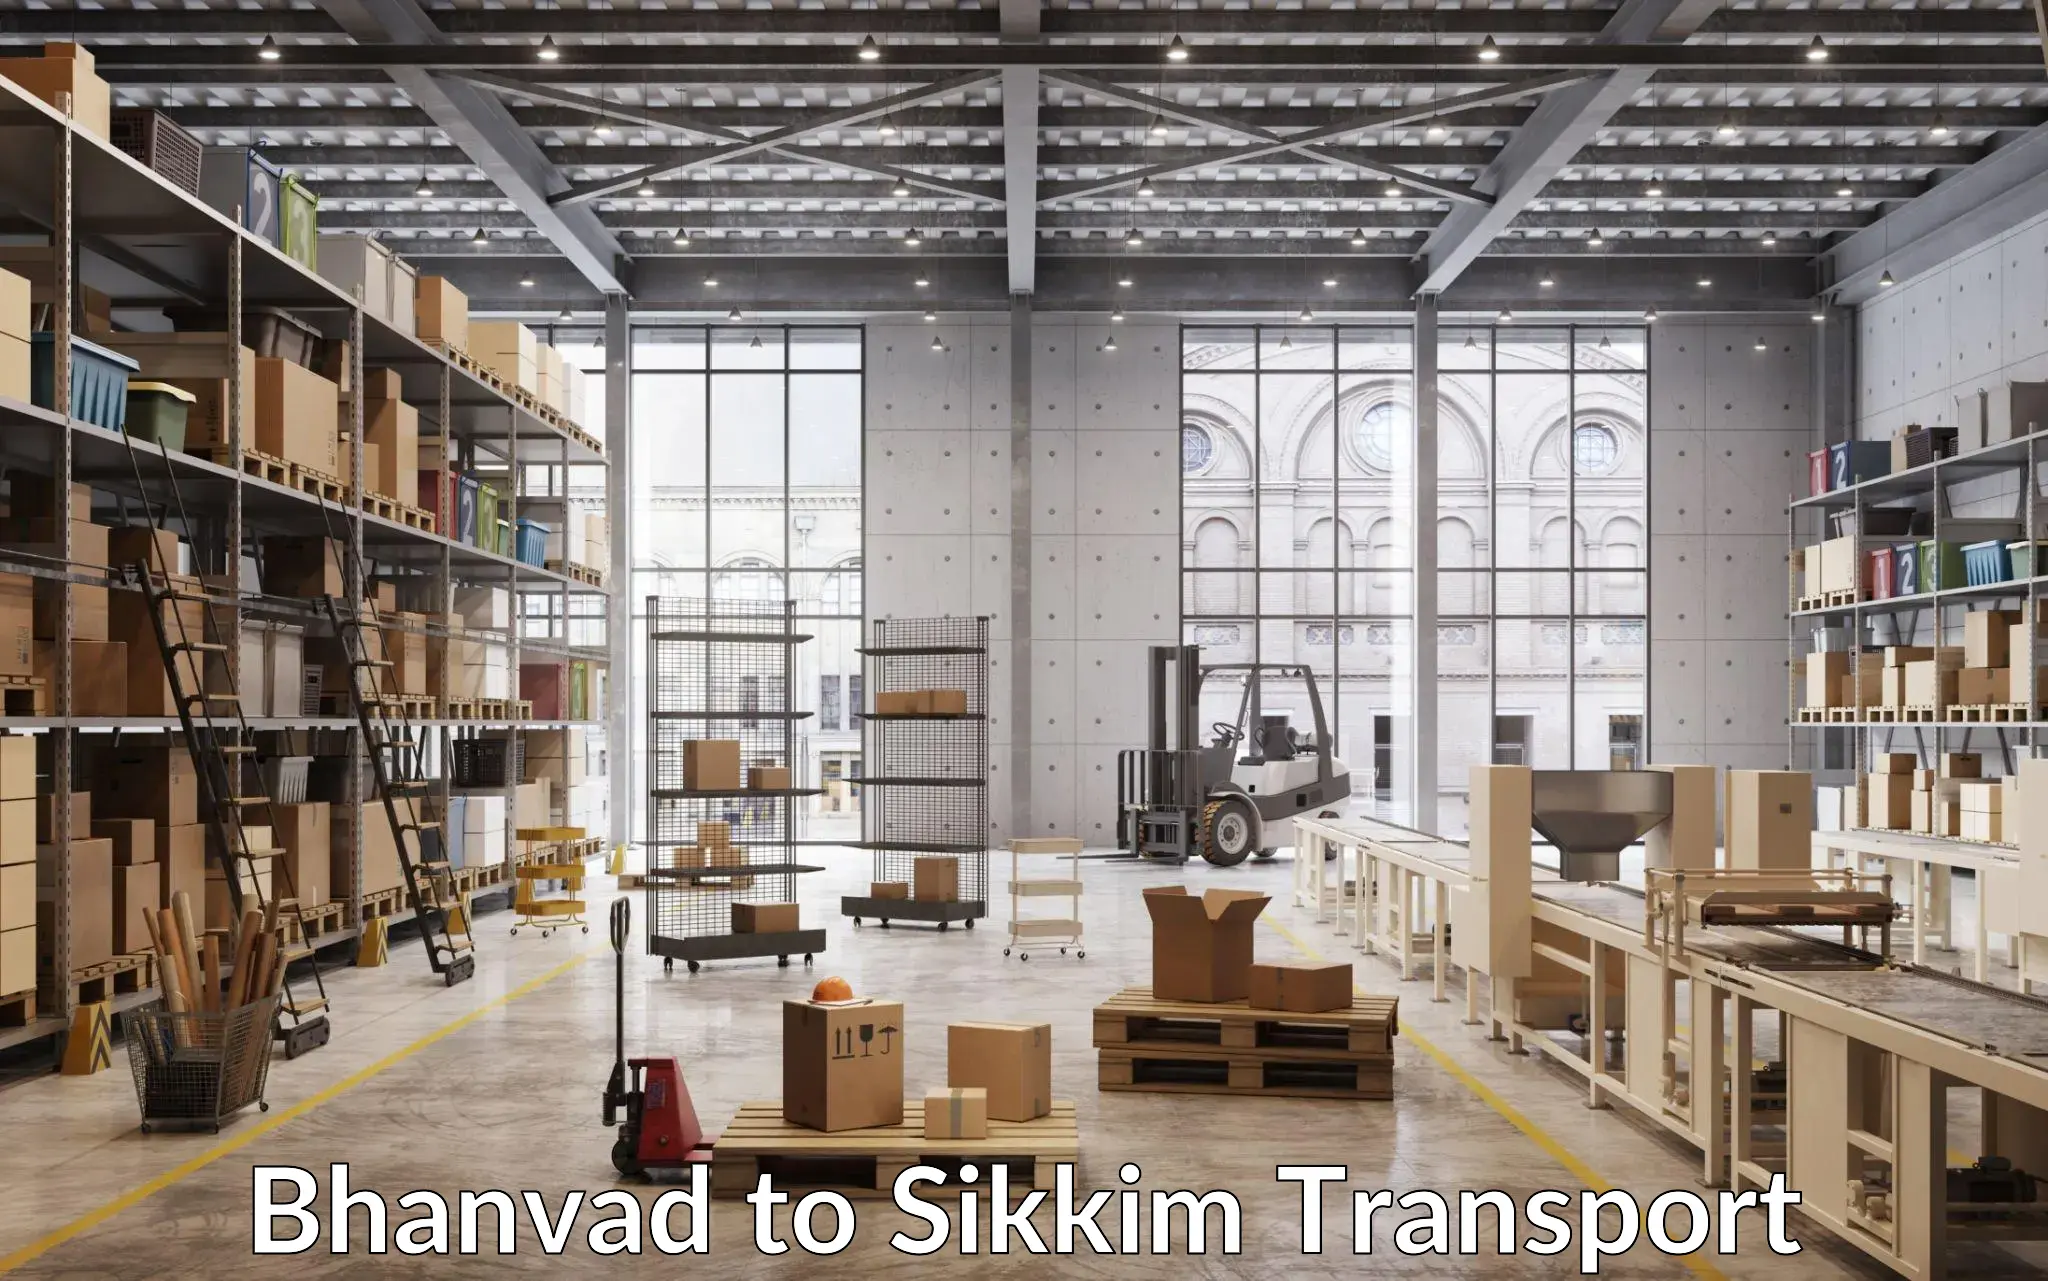 Truck transport companies in India Bhanvad to West Sikkim